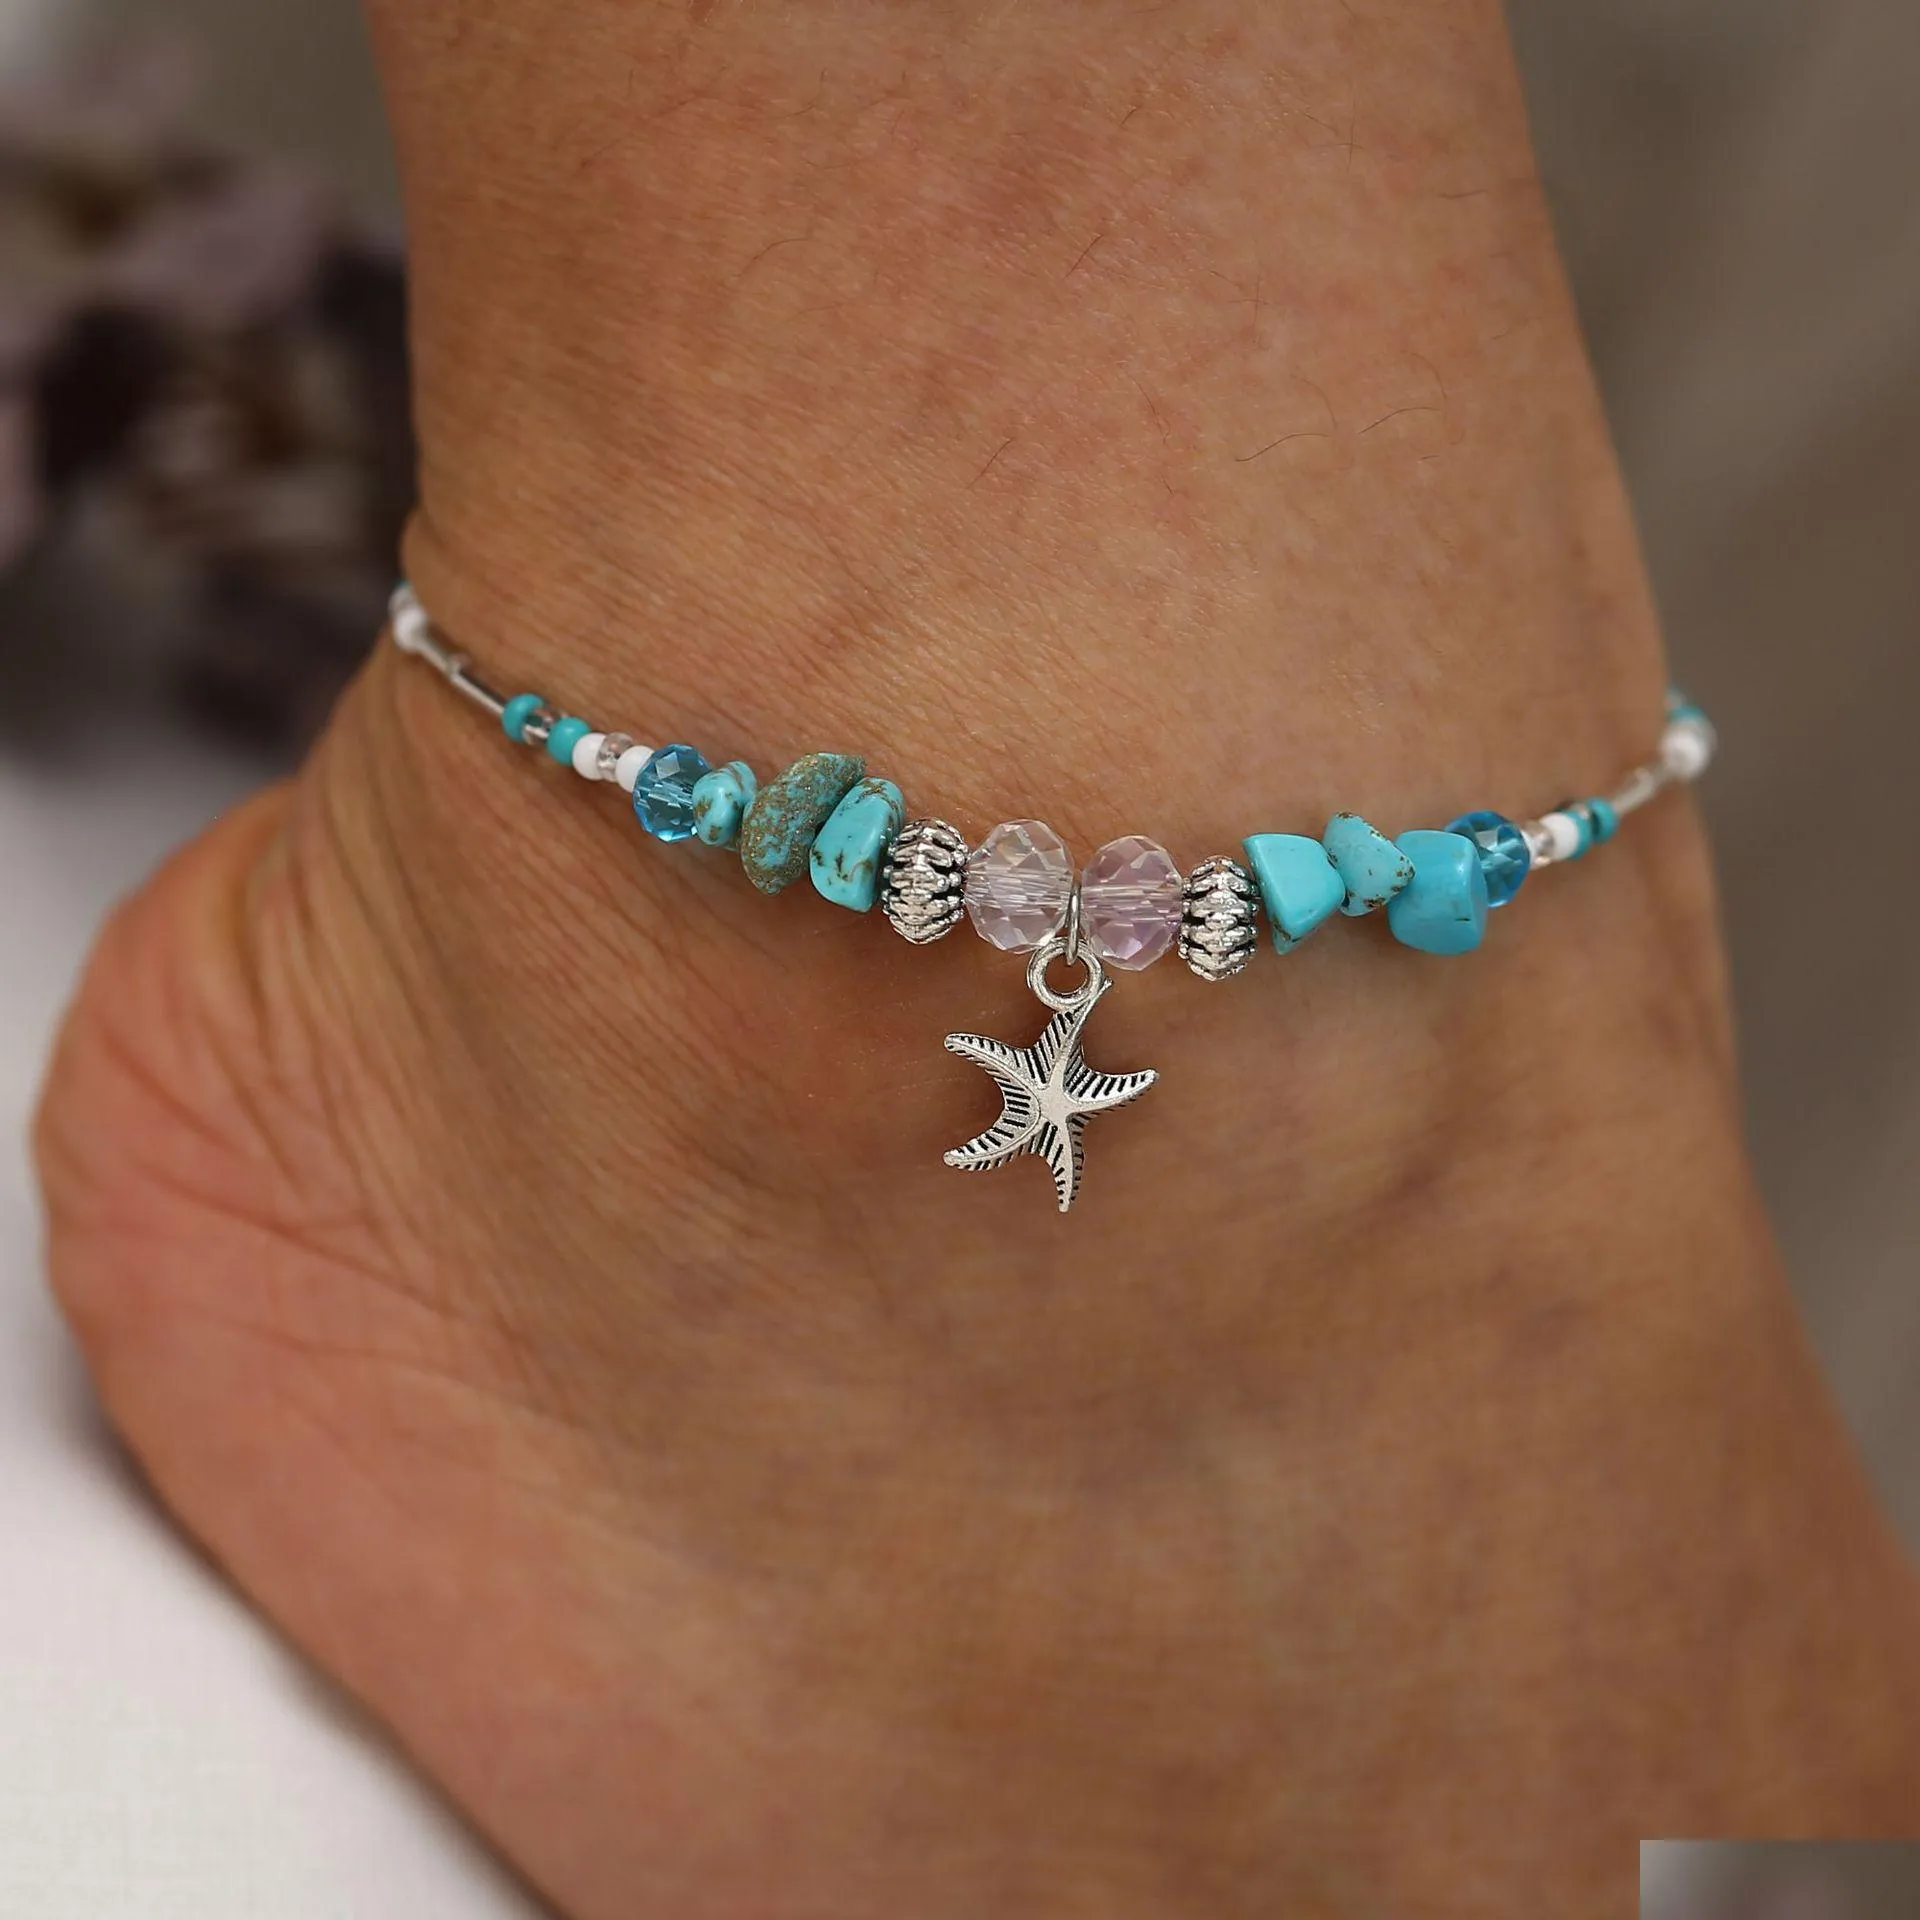 Anklets Bohemia Summer Starfish Beads Anklet Beach Chain Bracelet Ankle jewelry for girls girls drop delivery 2021 bdesybag otdbi